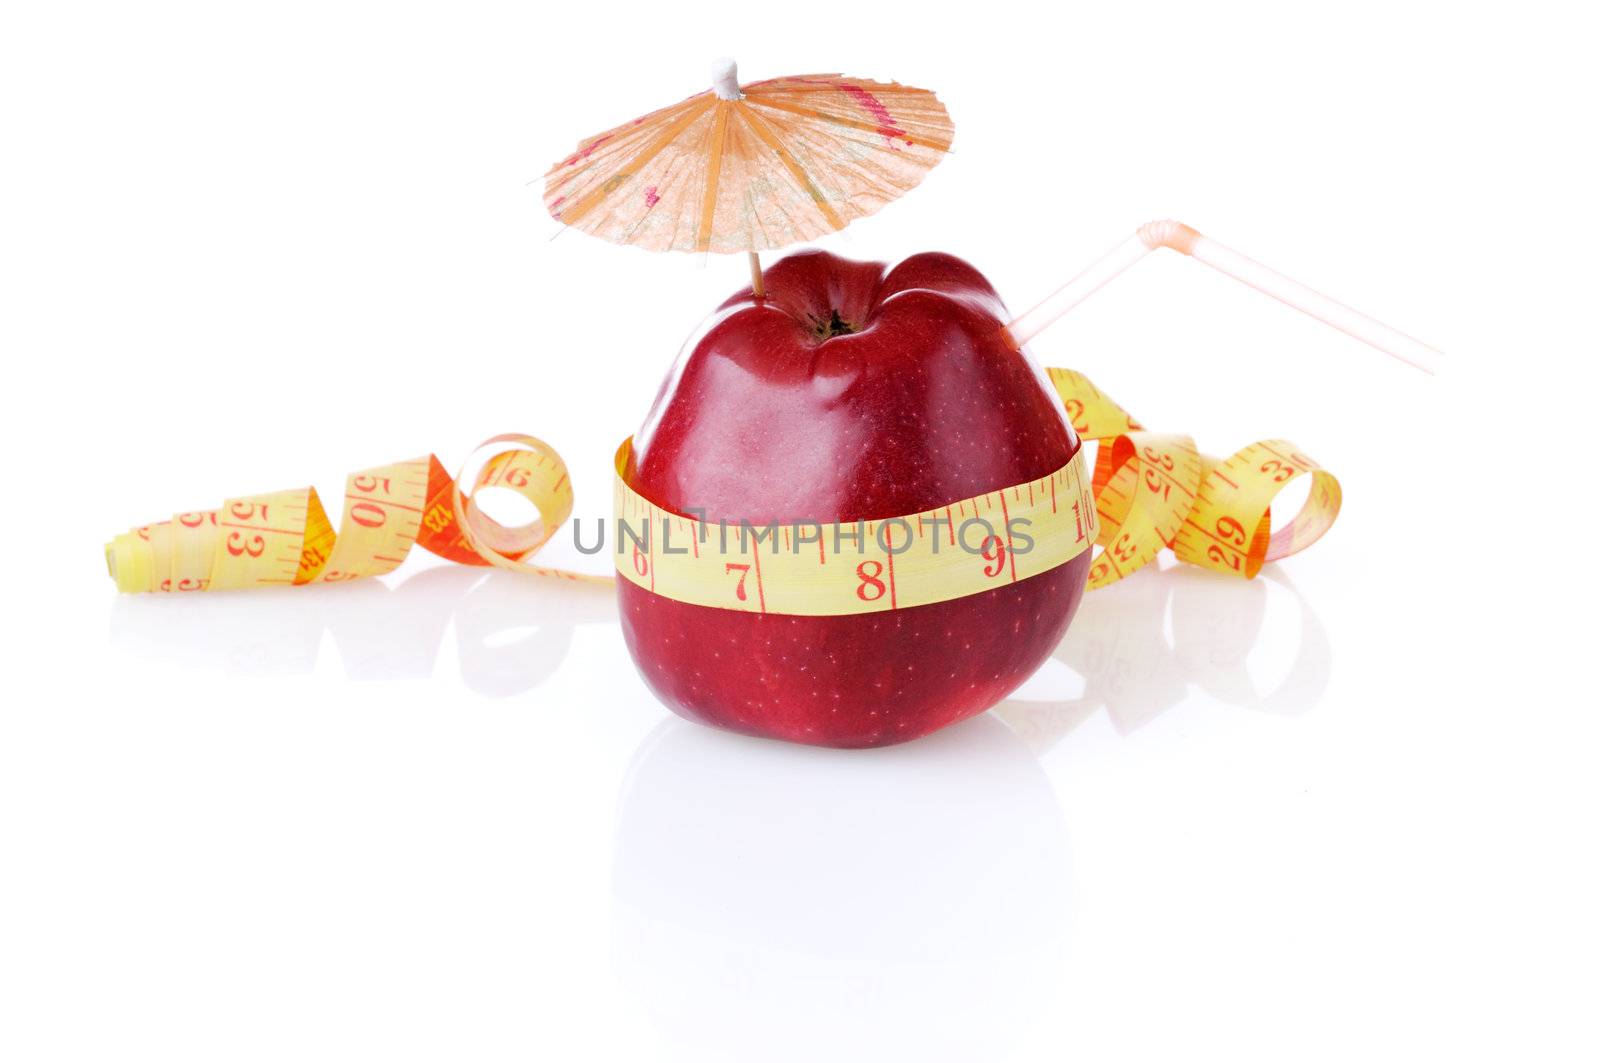 Red apple with umbrella and tube is measured by tape